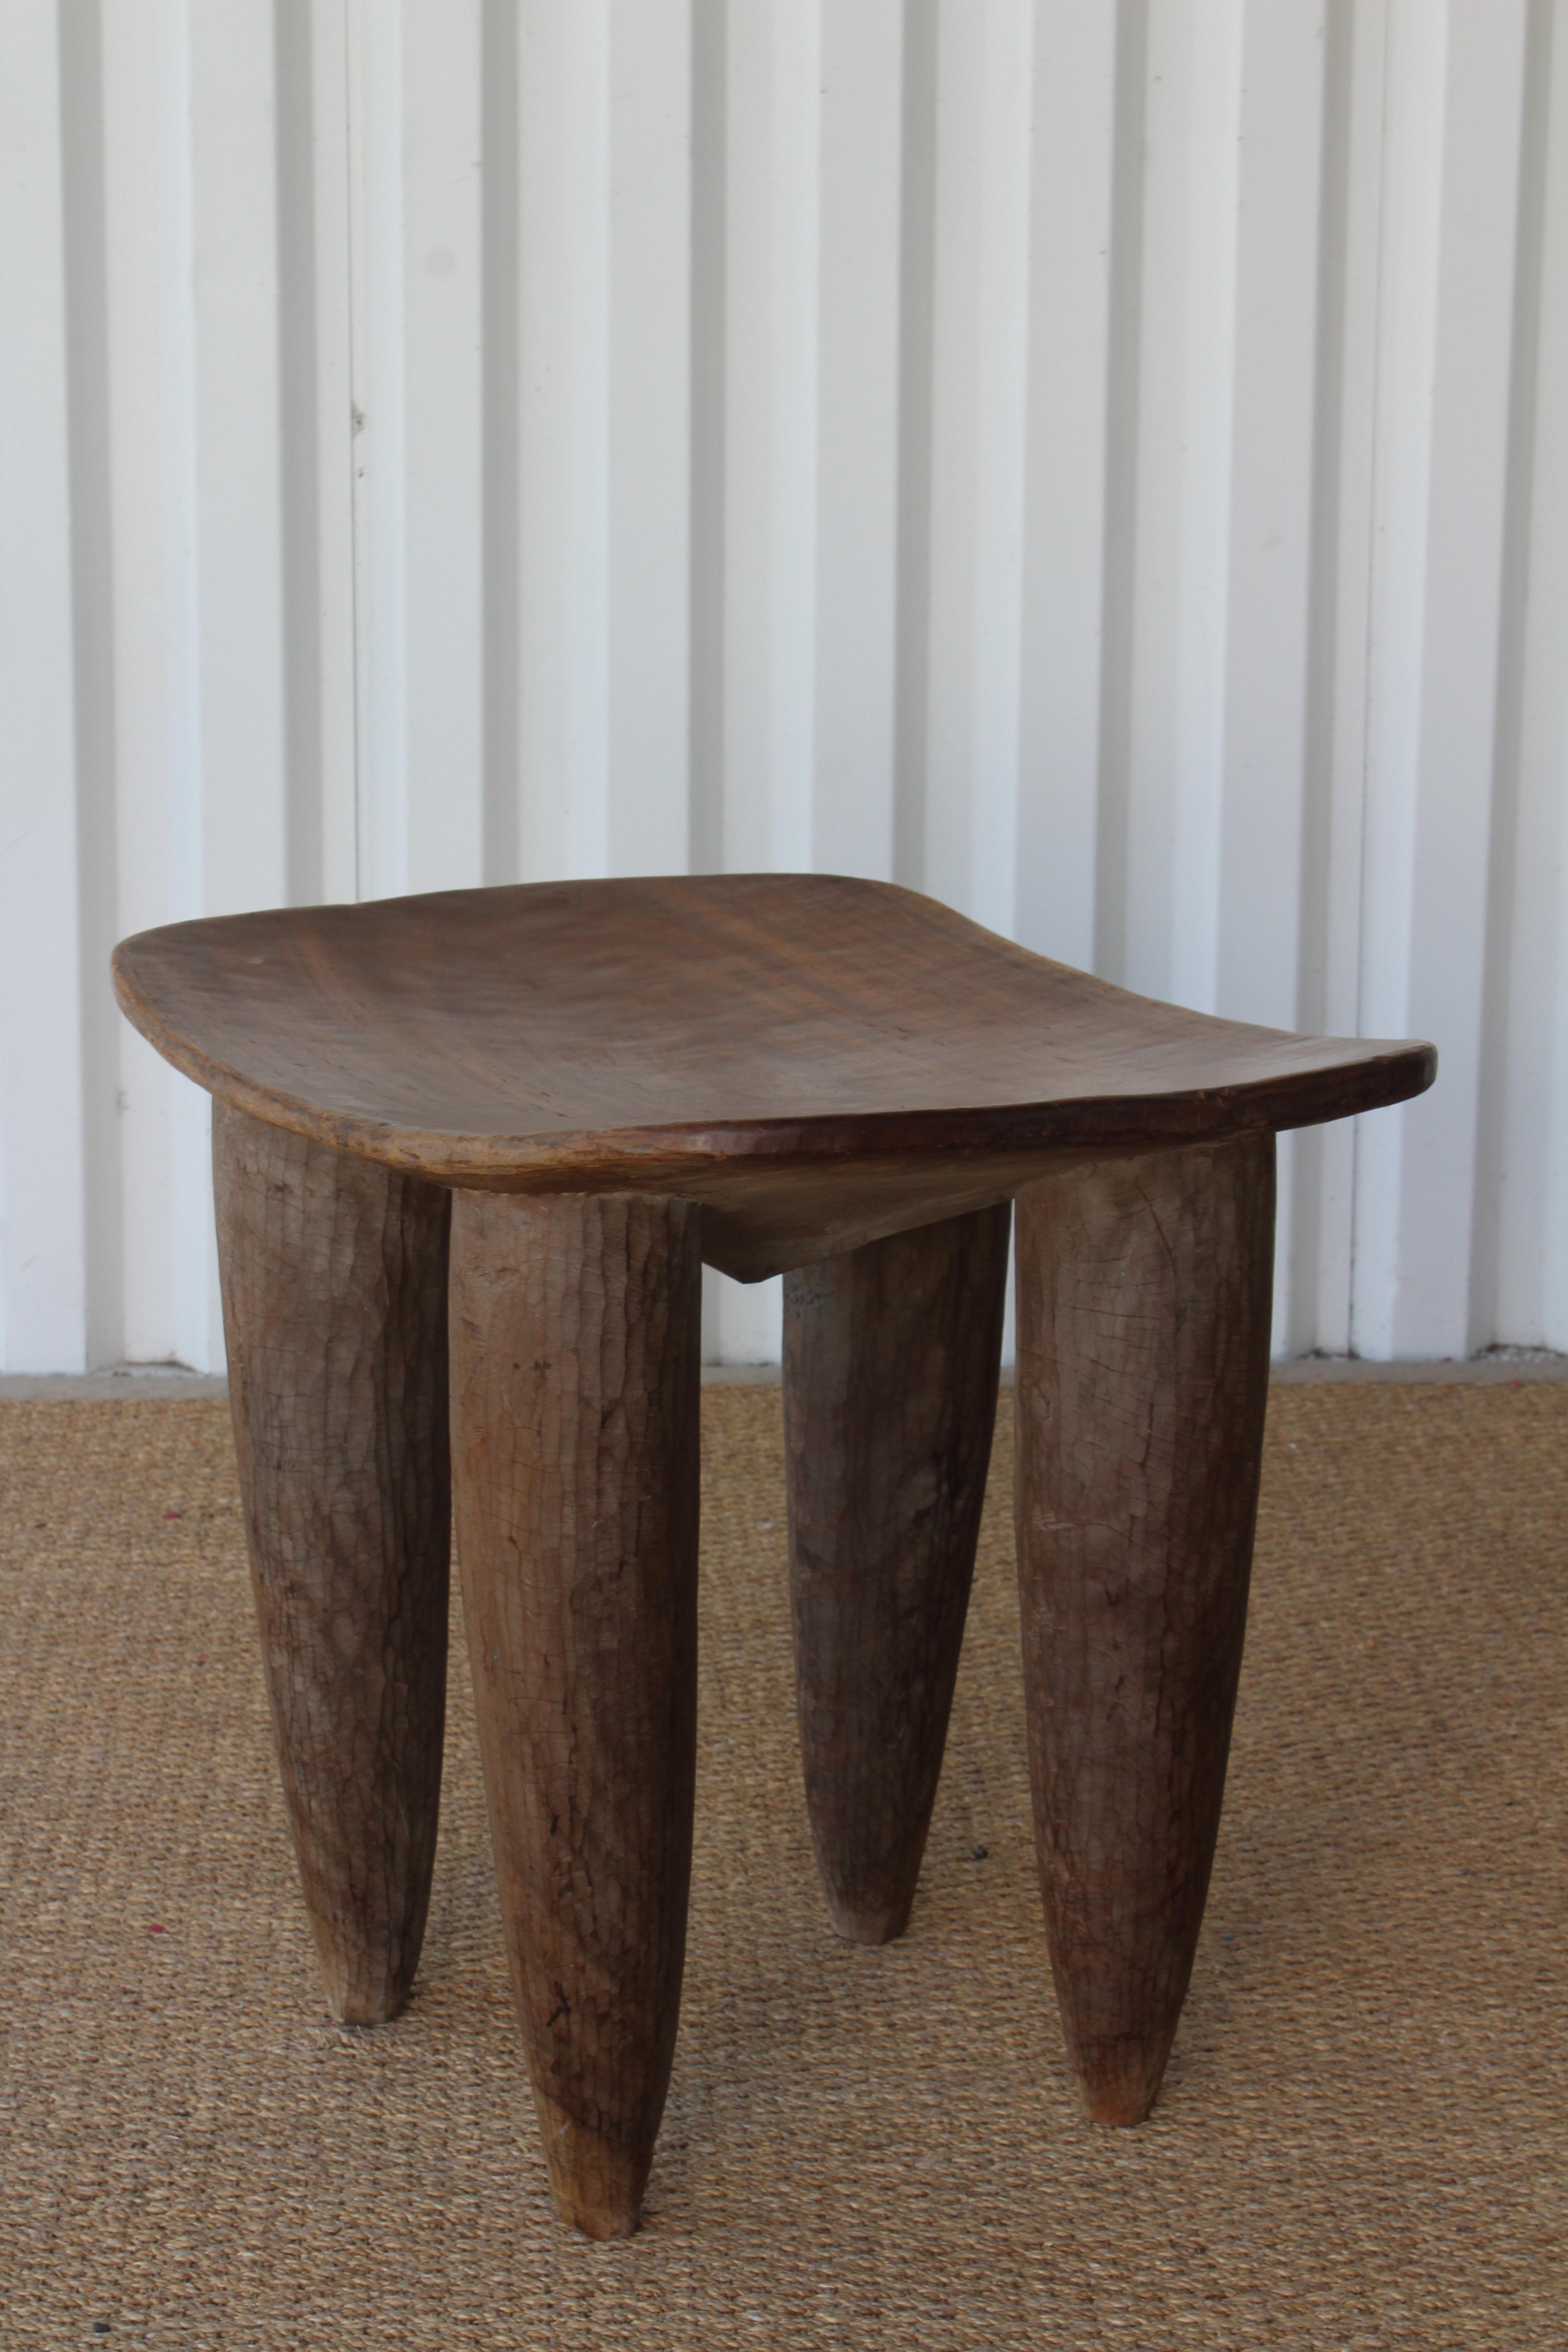 Tribal Vintage African Senufo Table, Coite d'Ivoire, Mid 20th Century